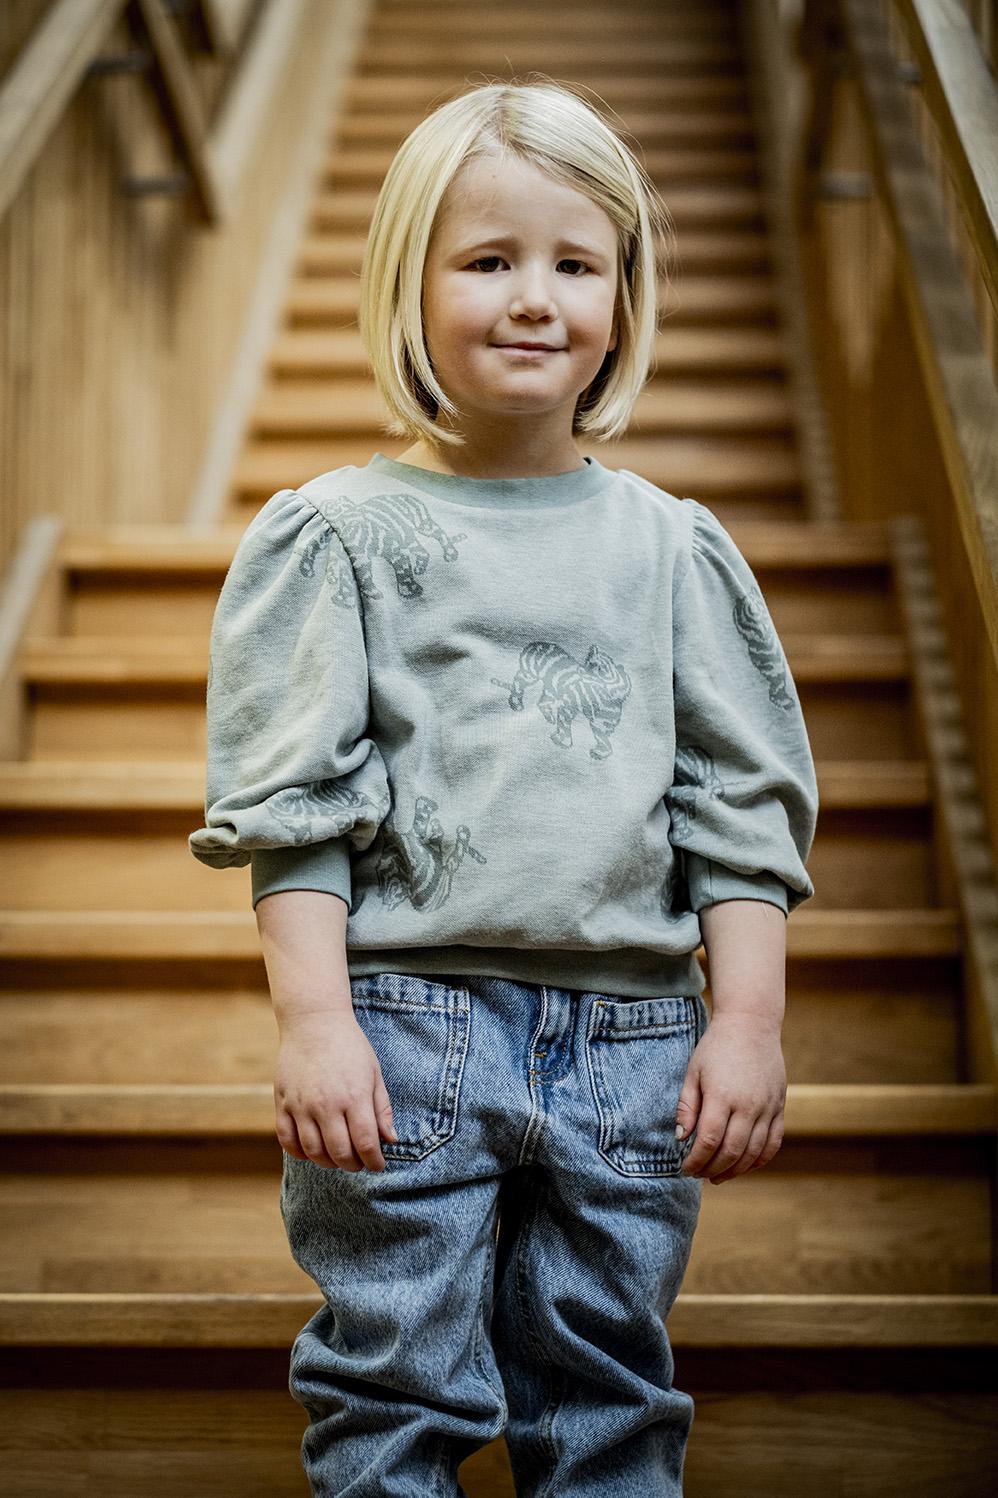 Child wearing the Child/Teen Minnie Top sewing pattern from Fibre Mood on The Fold Line. A jumper pattern made in French terry, sweatshirting or velvet jersey fabrics, featuring a round neckline, 3/4 length puffed sleeves, relaxed fit, ribbed neckline, he